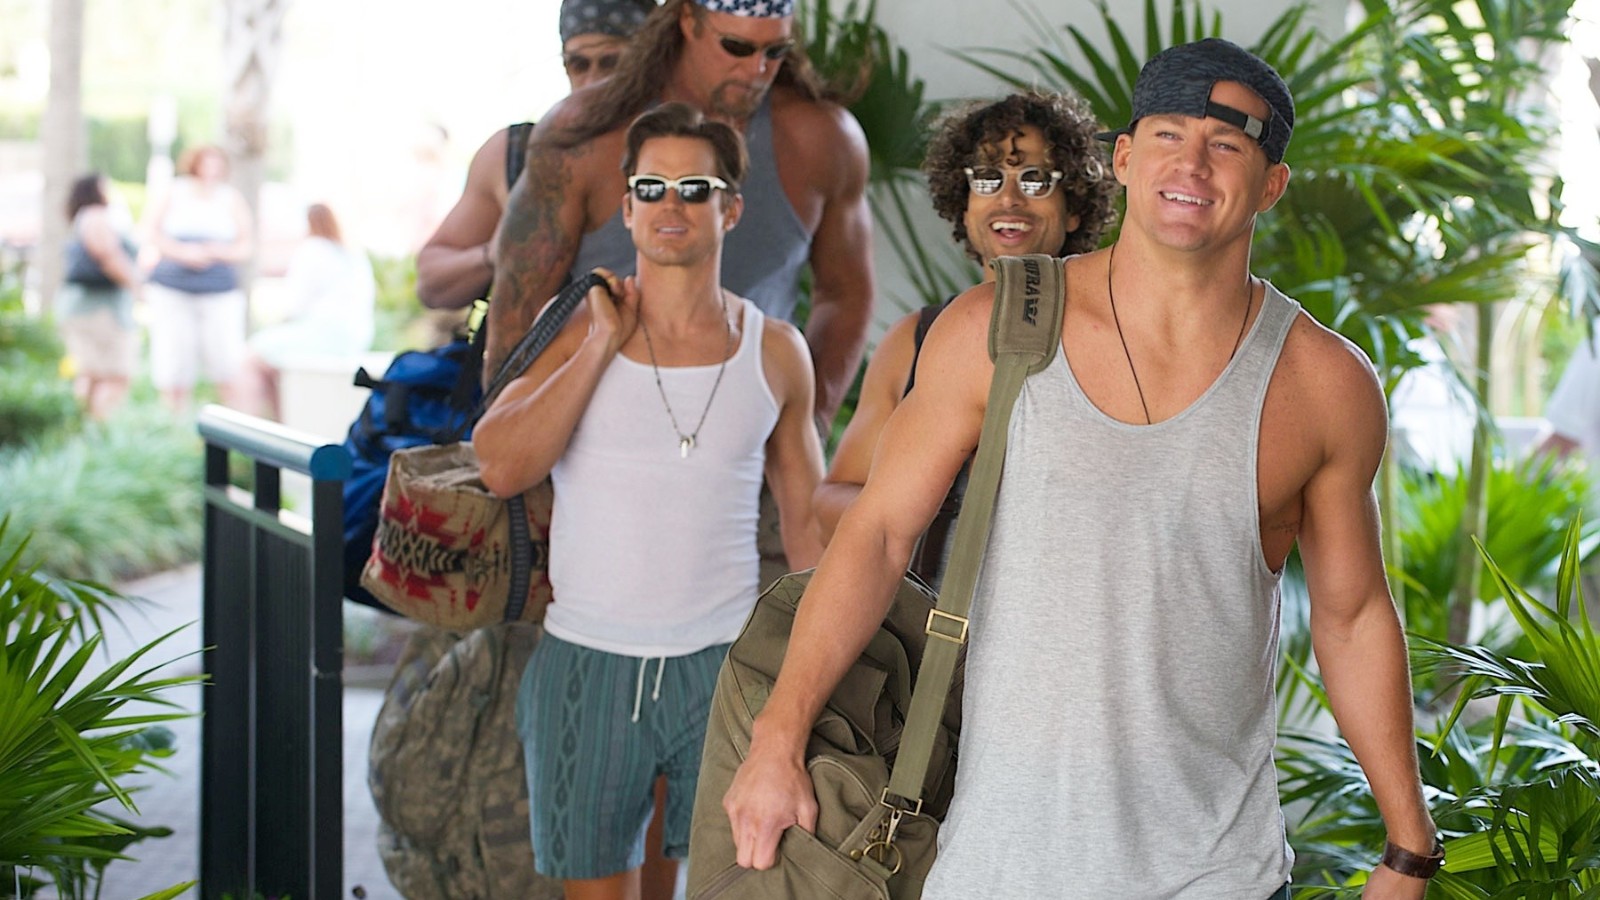 Magic Mike XXL': Should you see it? 